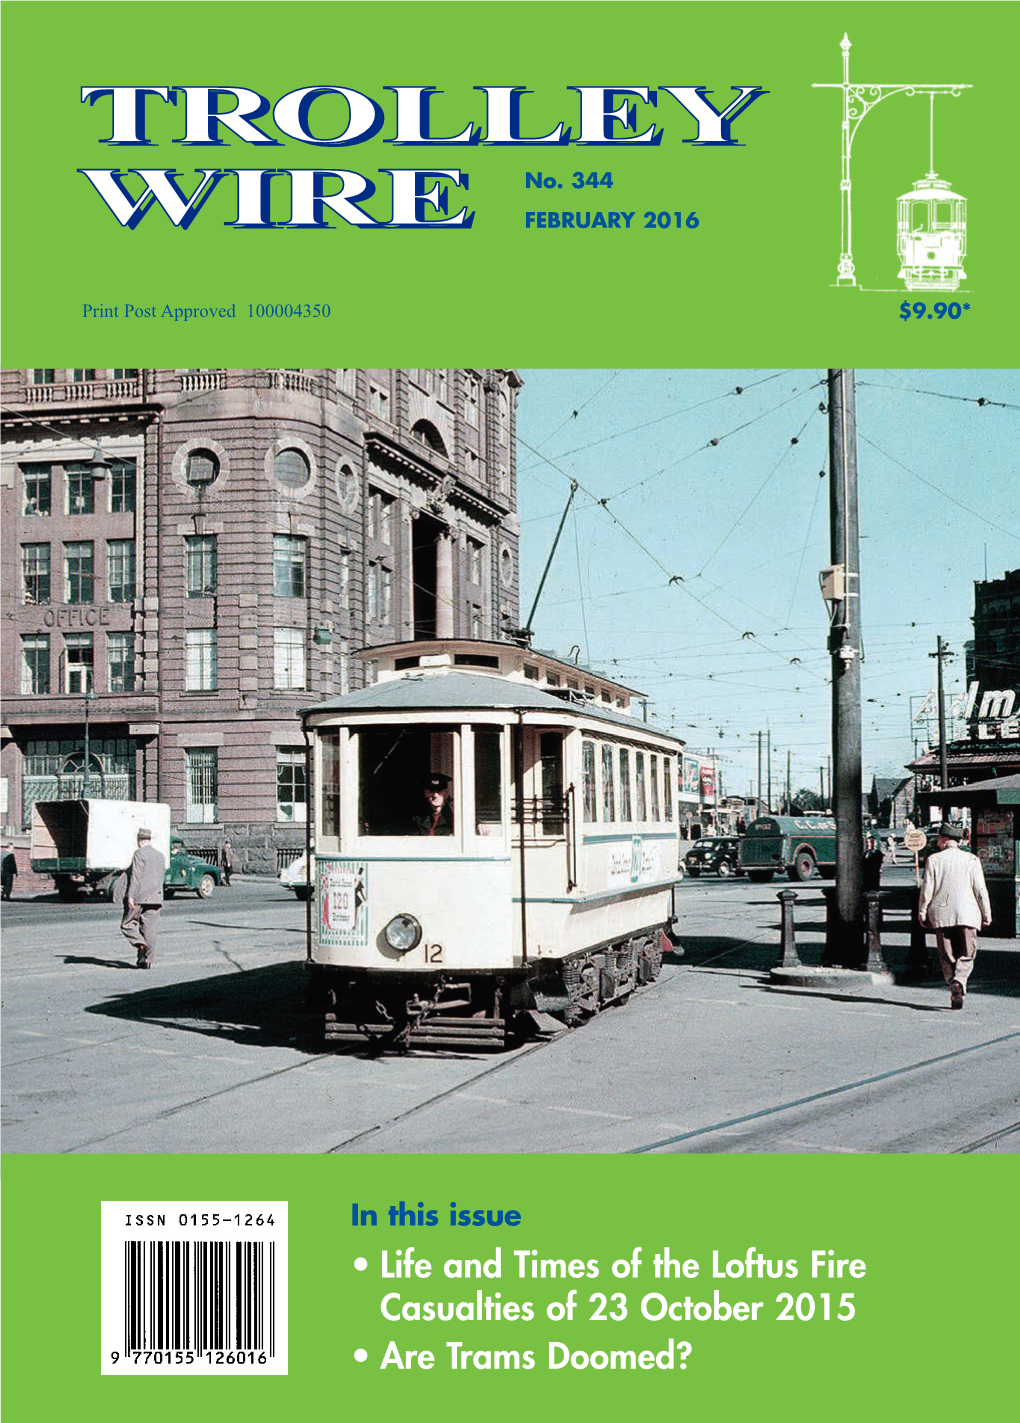 • Life and Times of the Loftus Fire Casualties of 23 October 2015 • Are Trams Doomed? TROLLEY WIRE FEBRUARY 2016